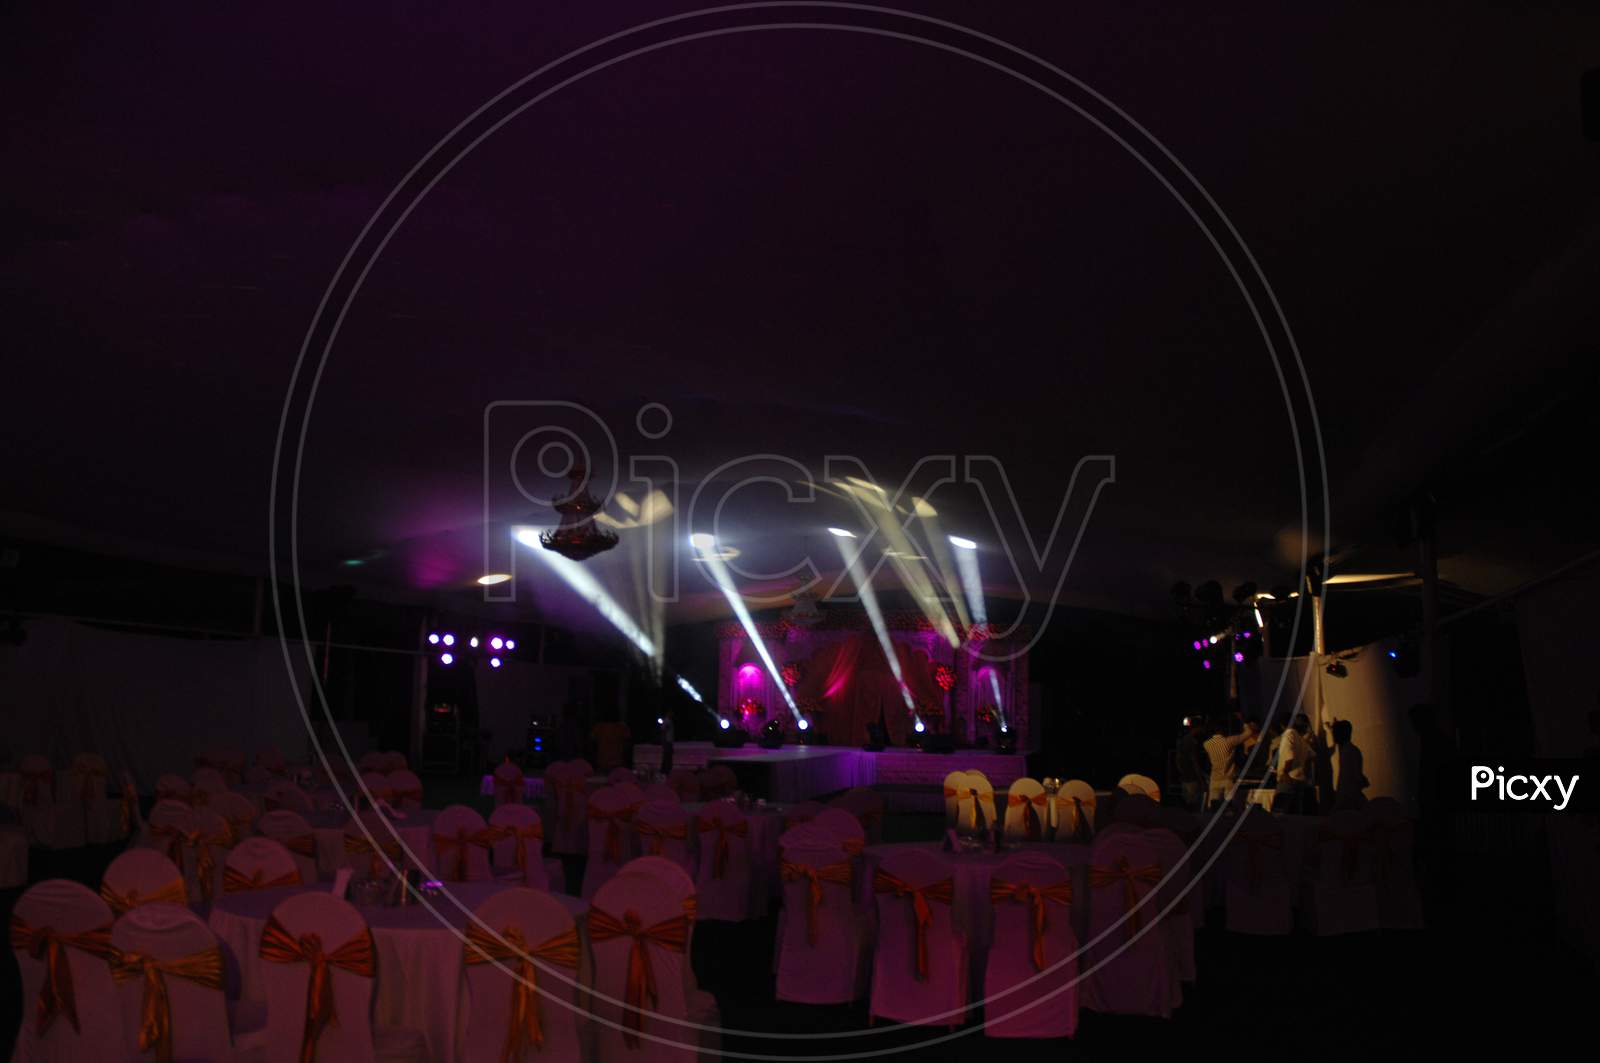 Wedding Reception Stage With Neon Lights